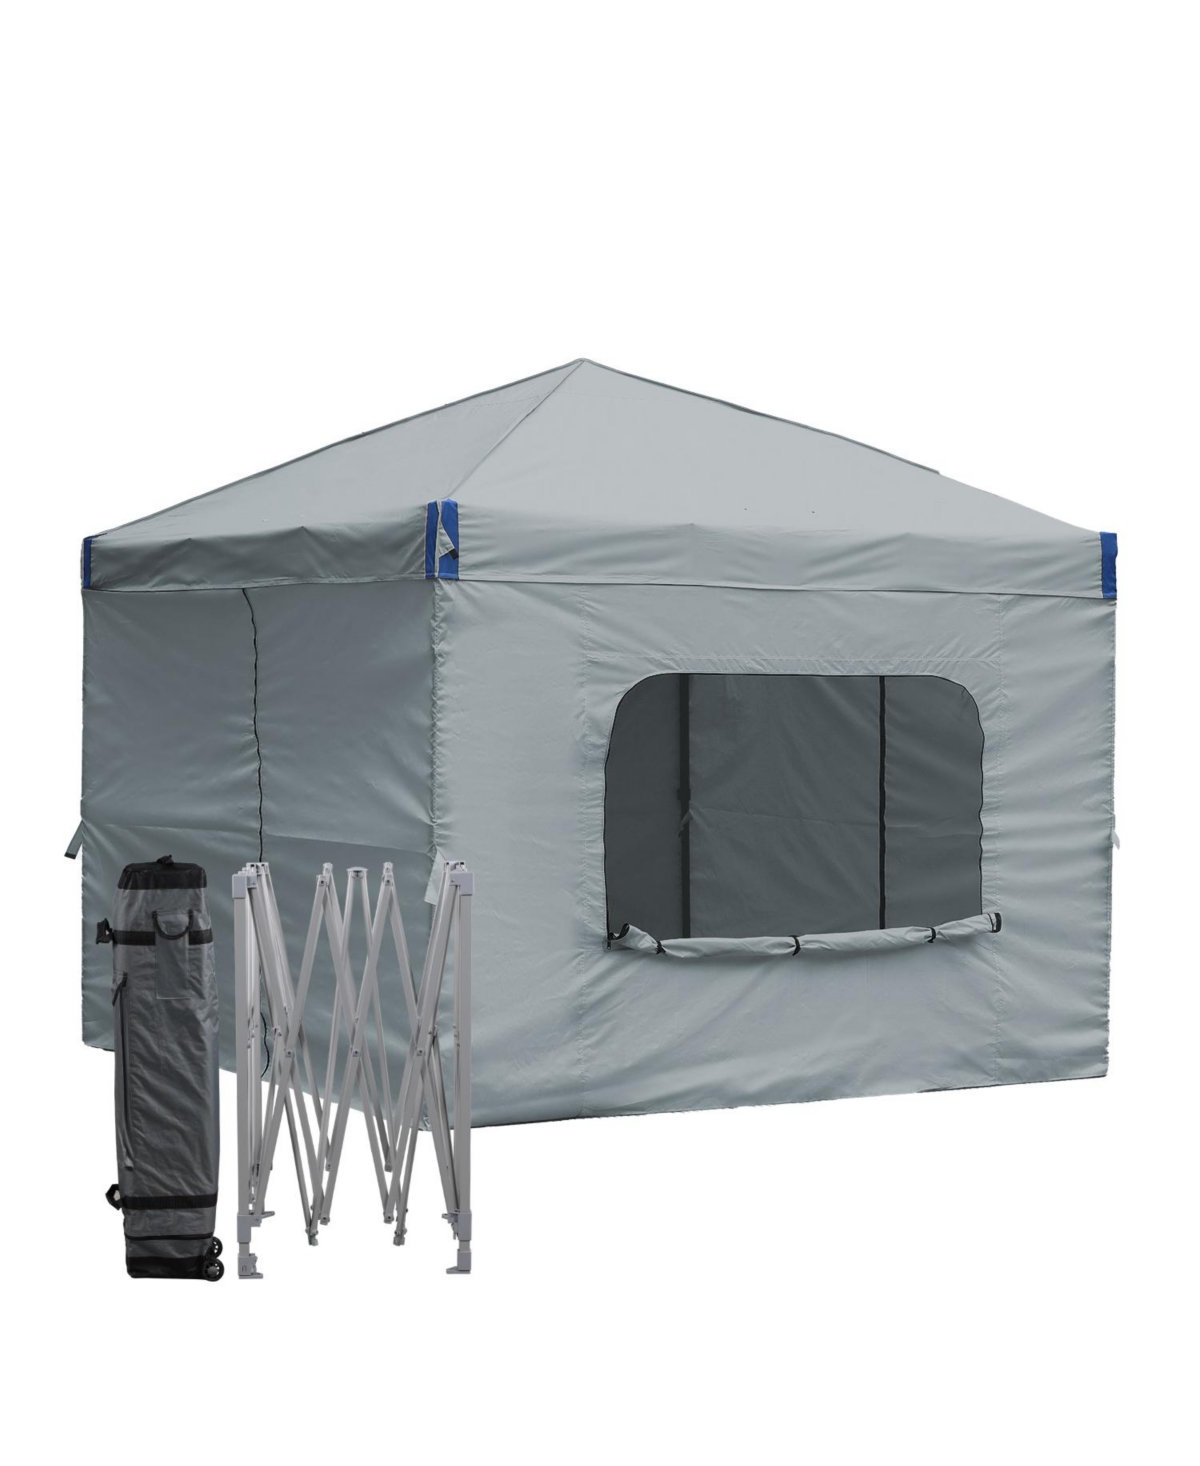 Pop Up Canopy Tent with Removable Mesh Window Sidewalls, Portable Instant Shade Canopy with Roller Bag - Grey